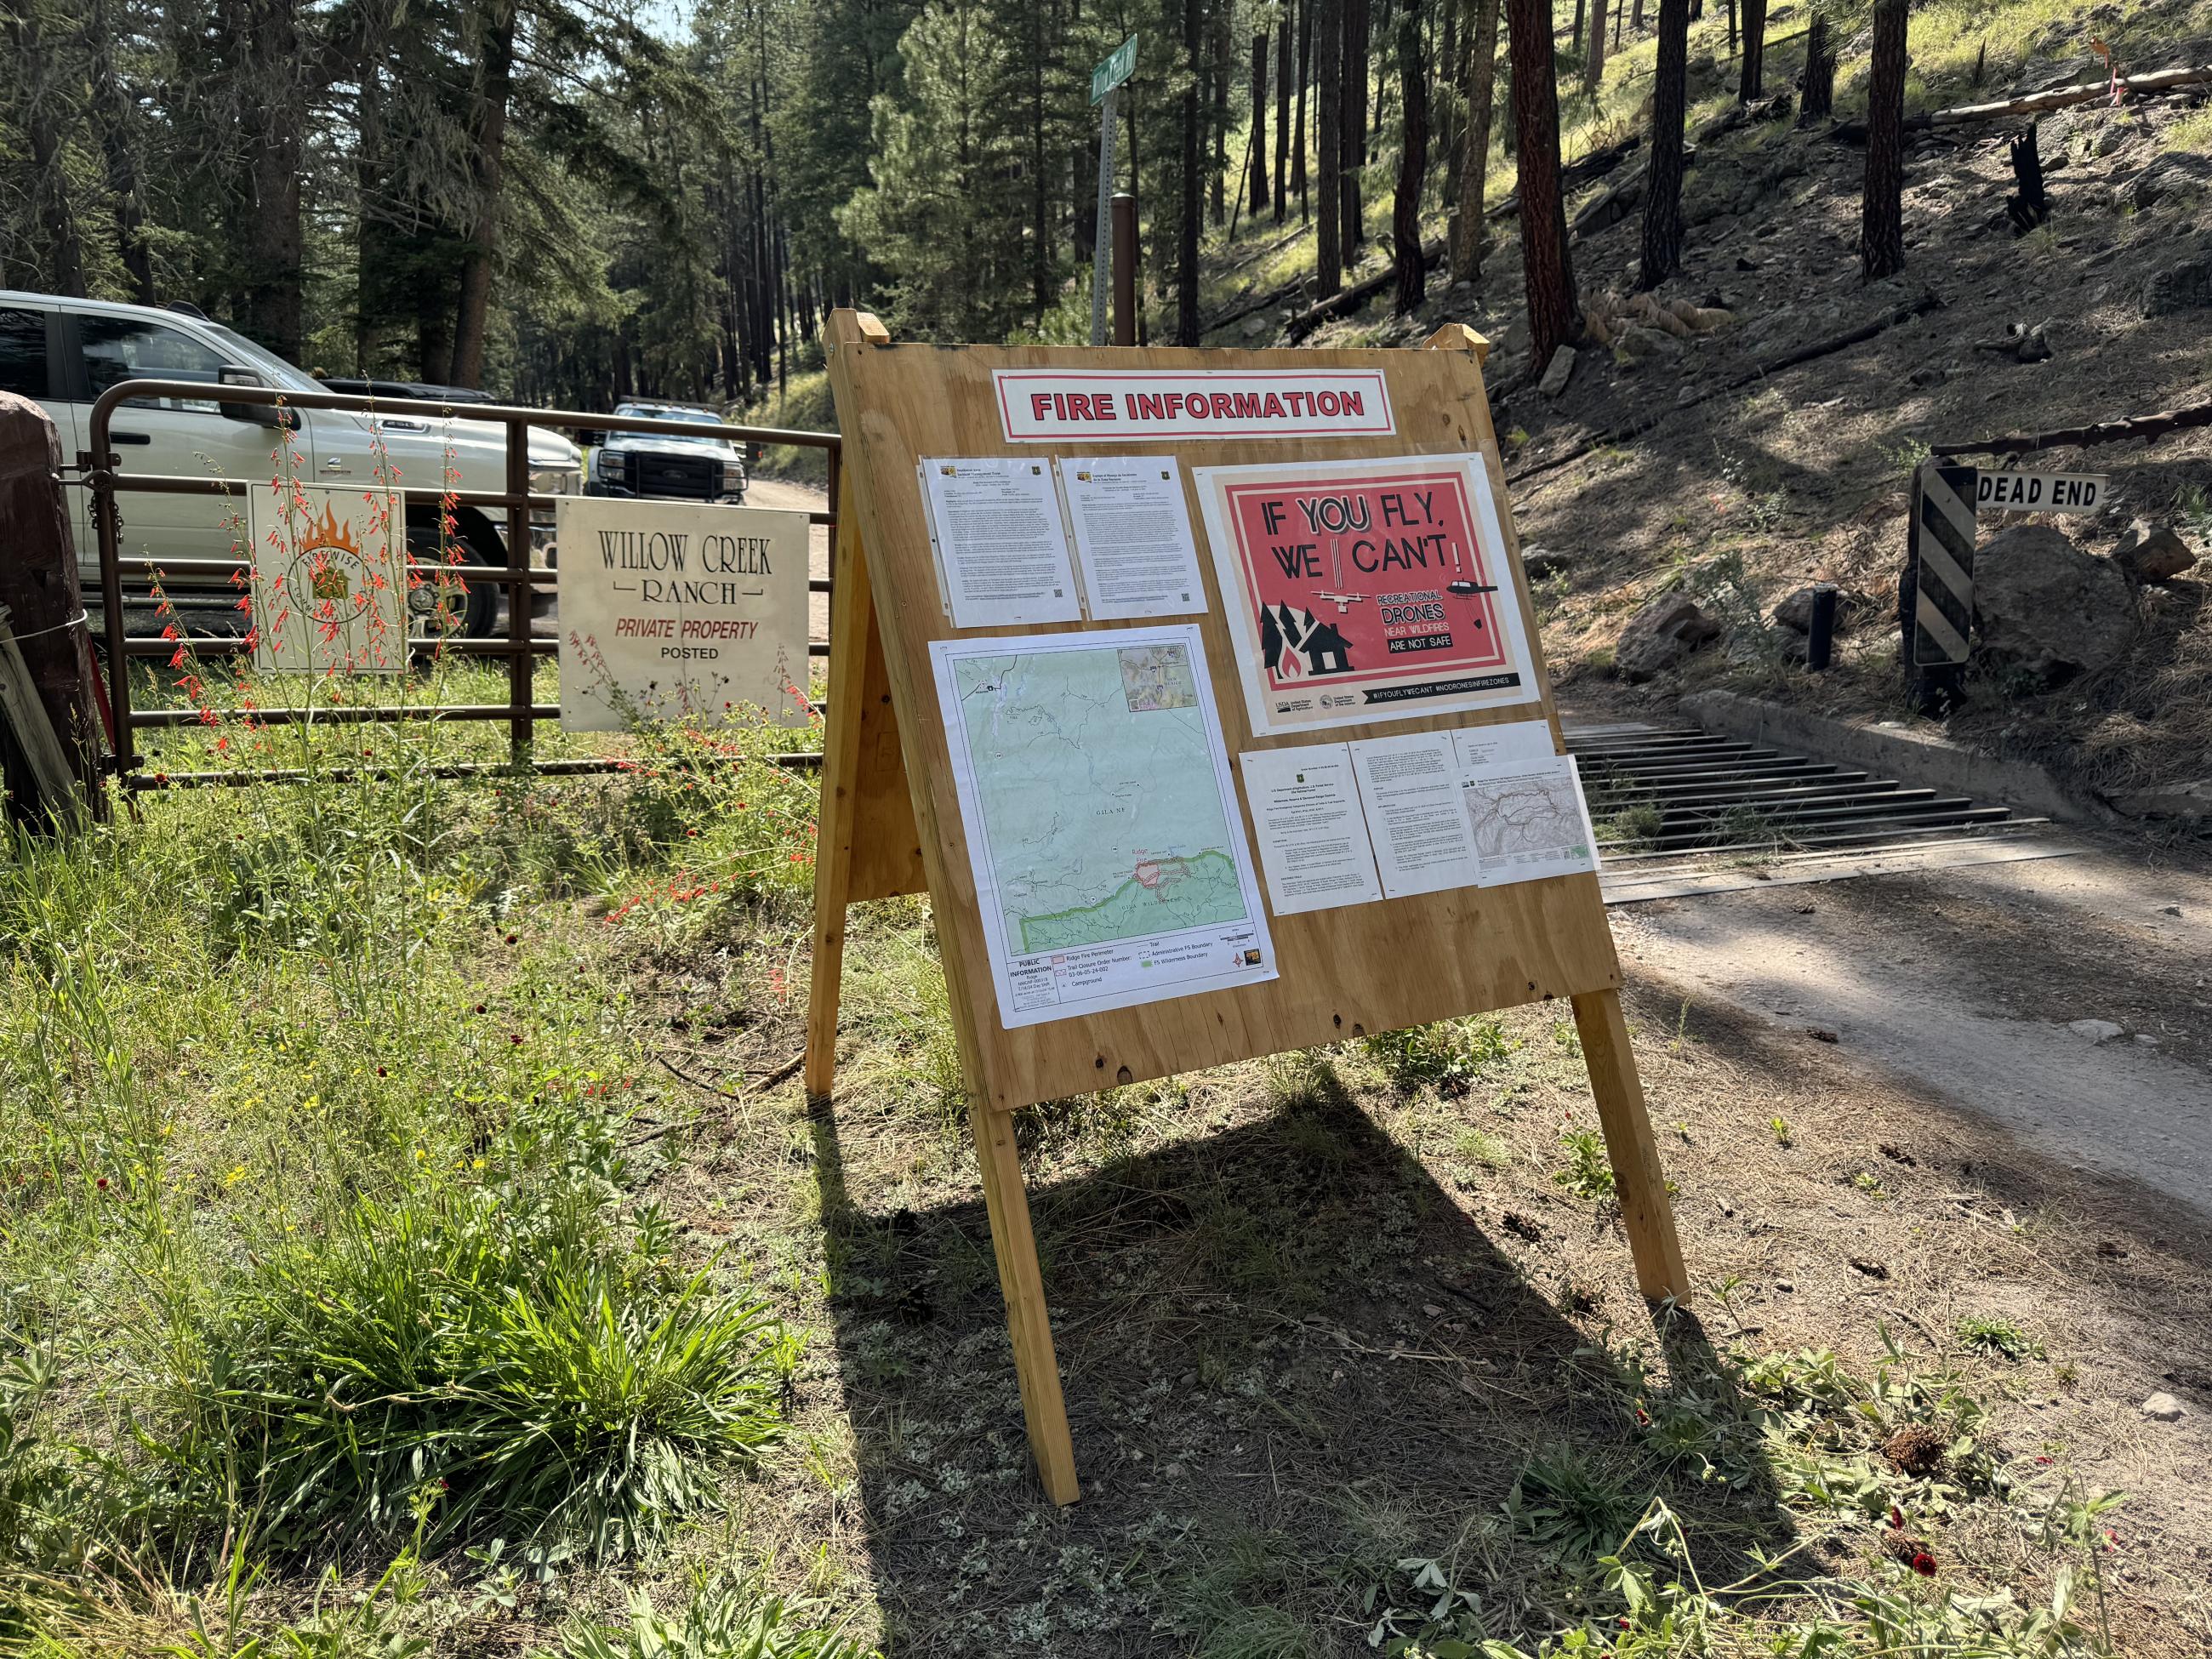 Sandwich board with fire updates and maps at willow creek community gate.